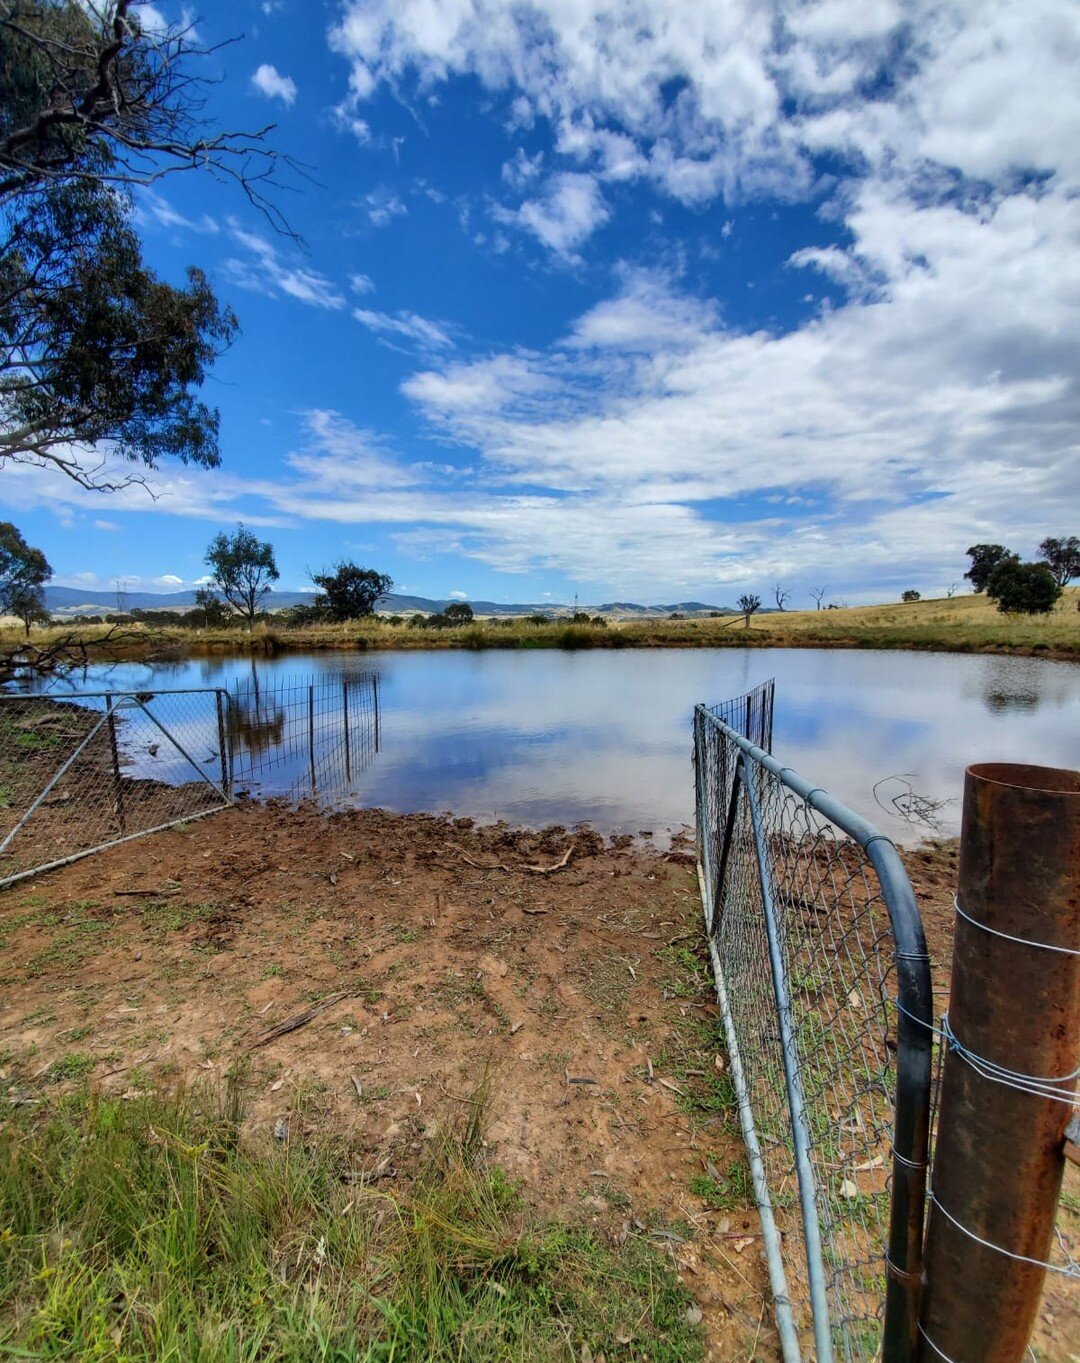 Here are some photo updates of the dam restoration works we have been working on! 

We have added a hardened access point so that cattle may access the water from the dam without impacting infringing and riparian vegetation. 

We are currently triali